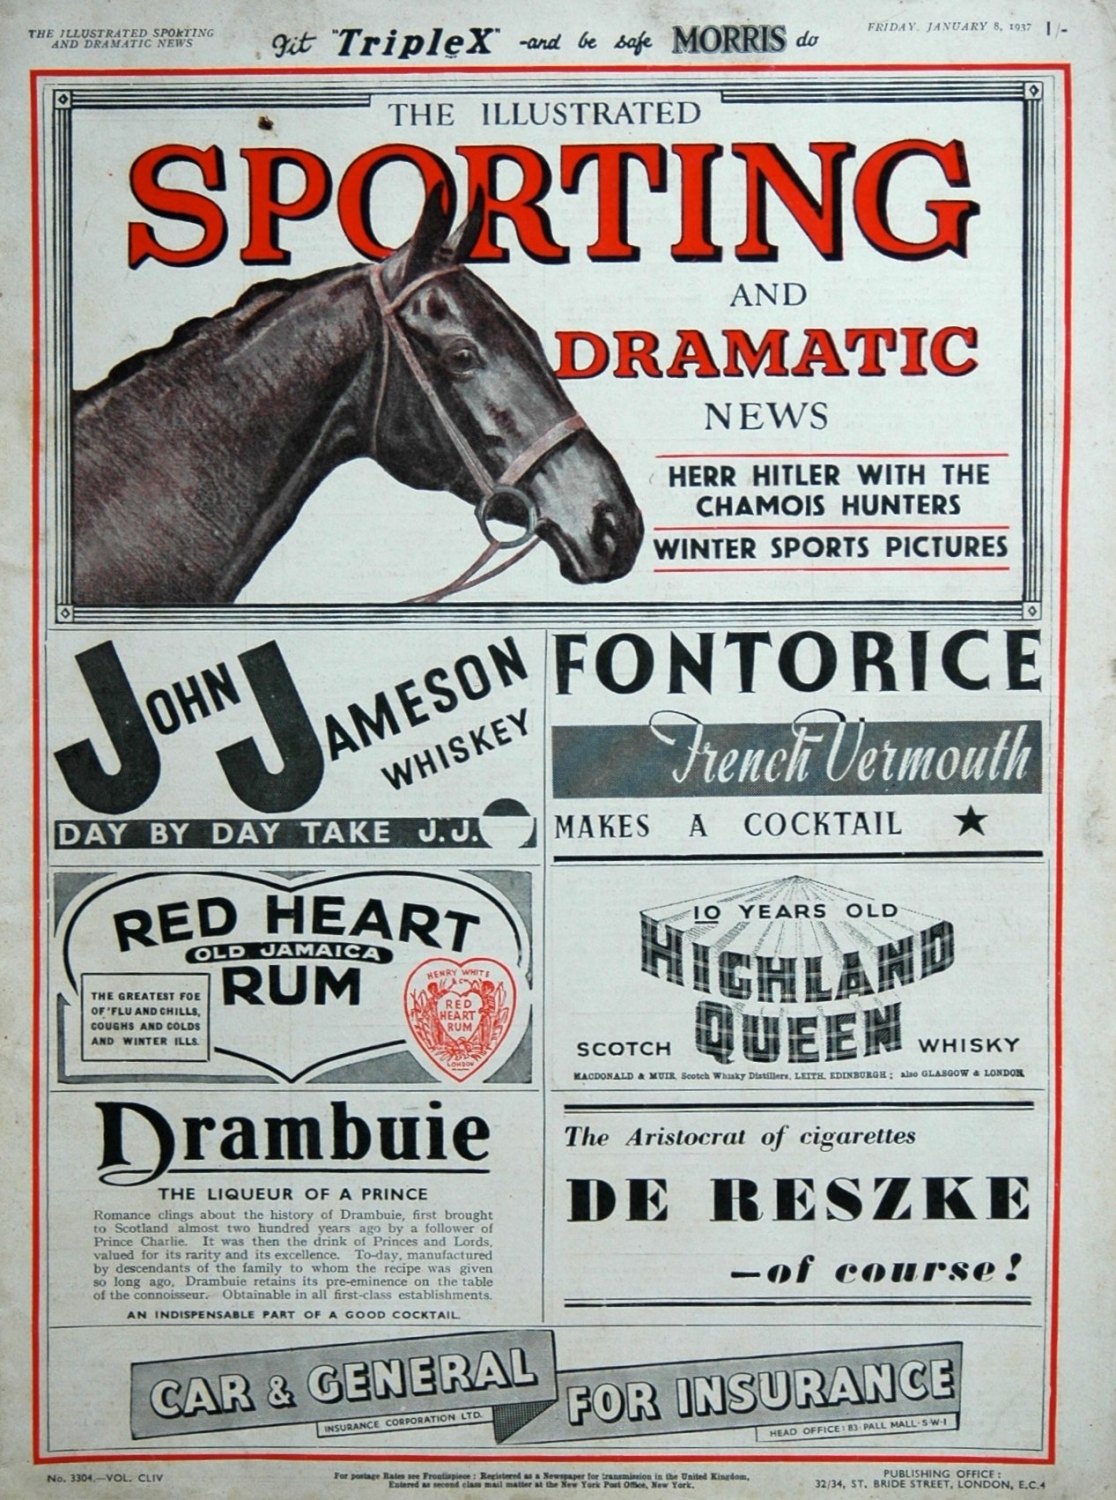 Illustrated Sporting and Dramatic News January 8th 1937.